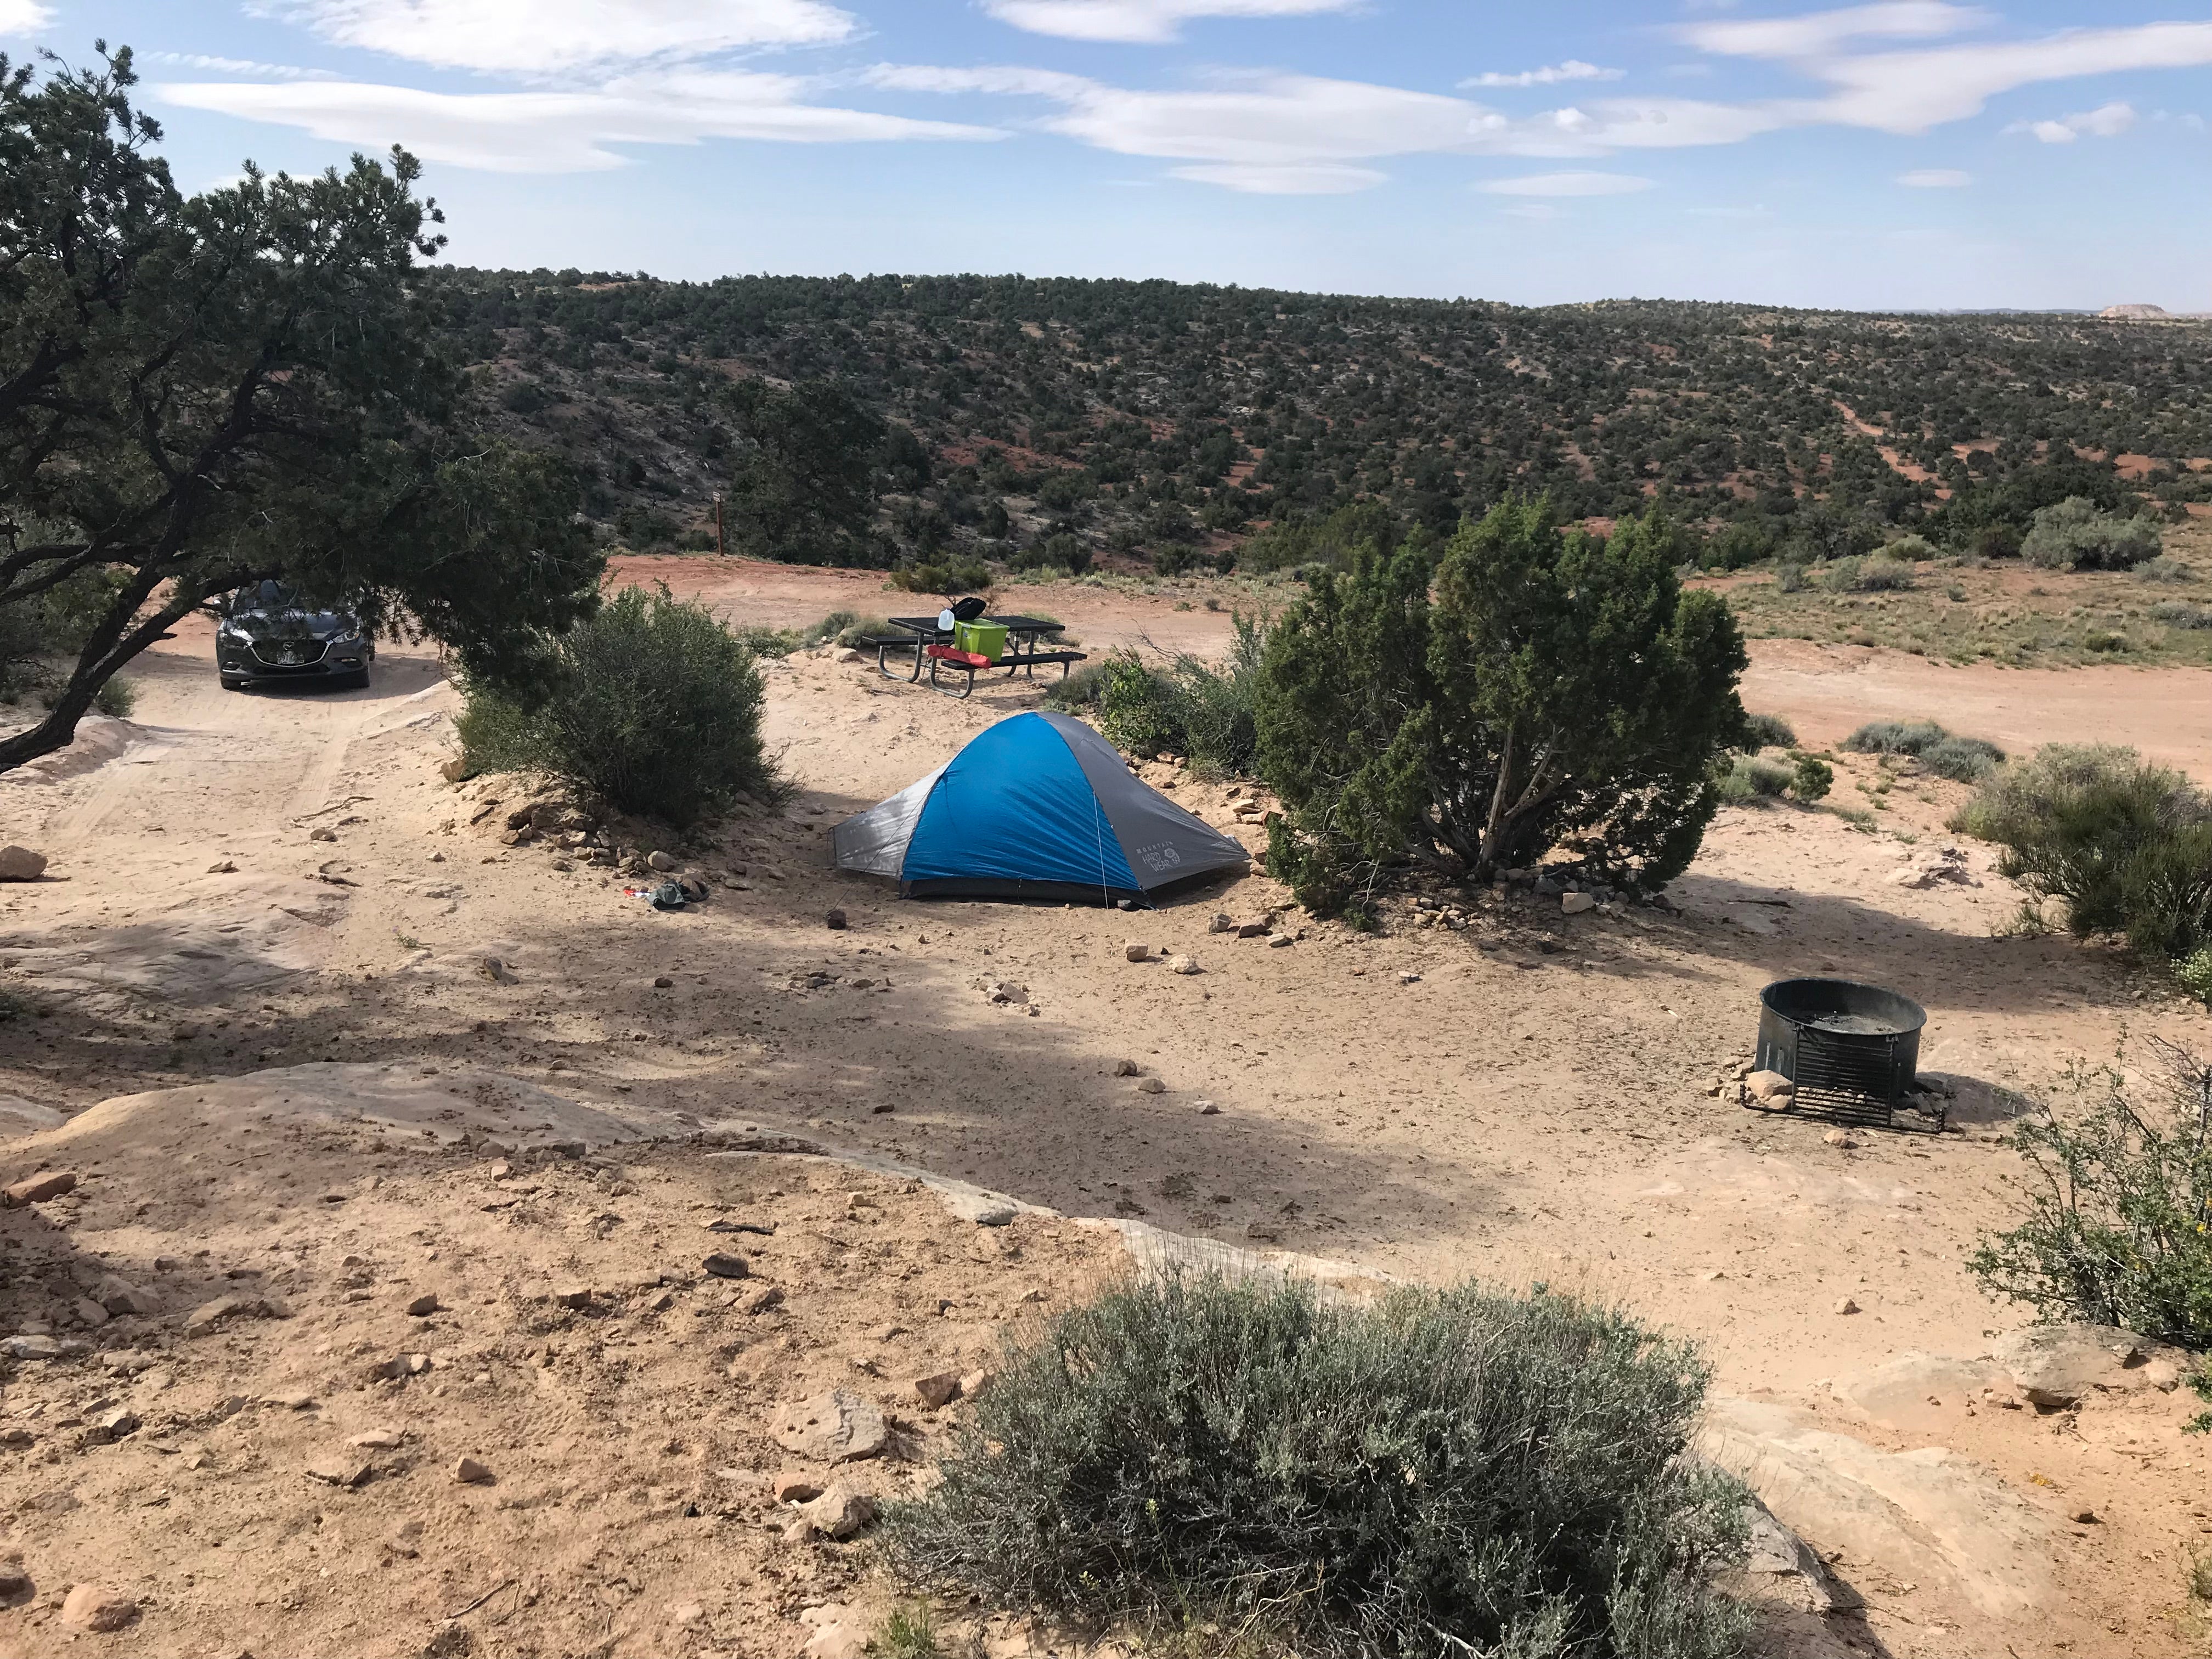 There was a large rock outcropping behind the site so this photo is taken from those rocks to include all the amenities--fire pit, table, tent site, parking spot.